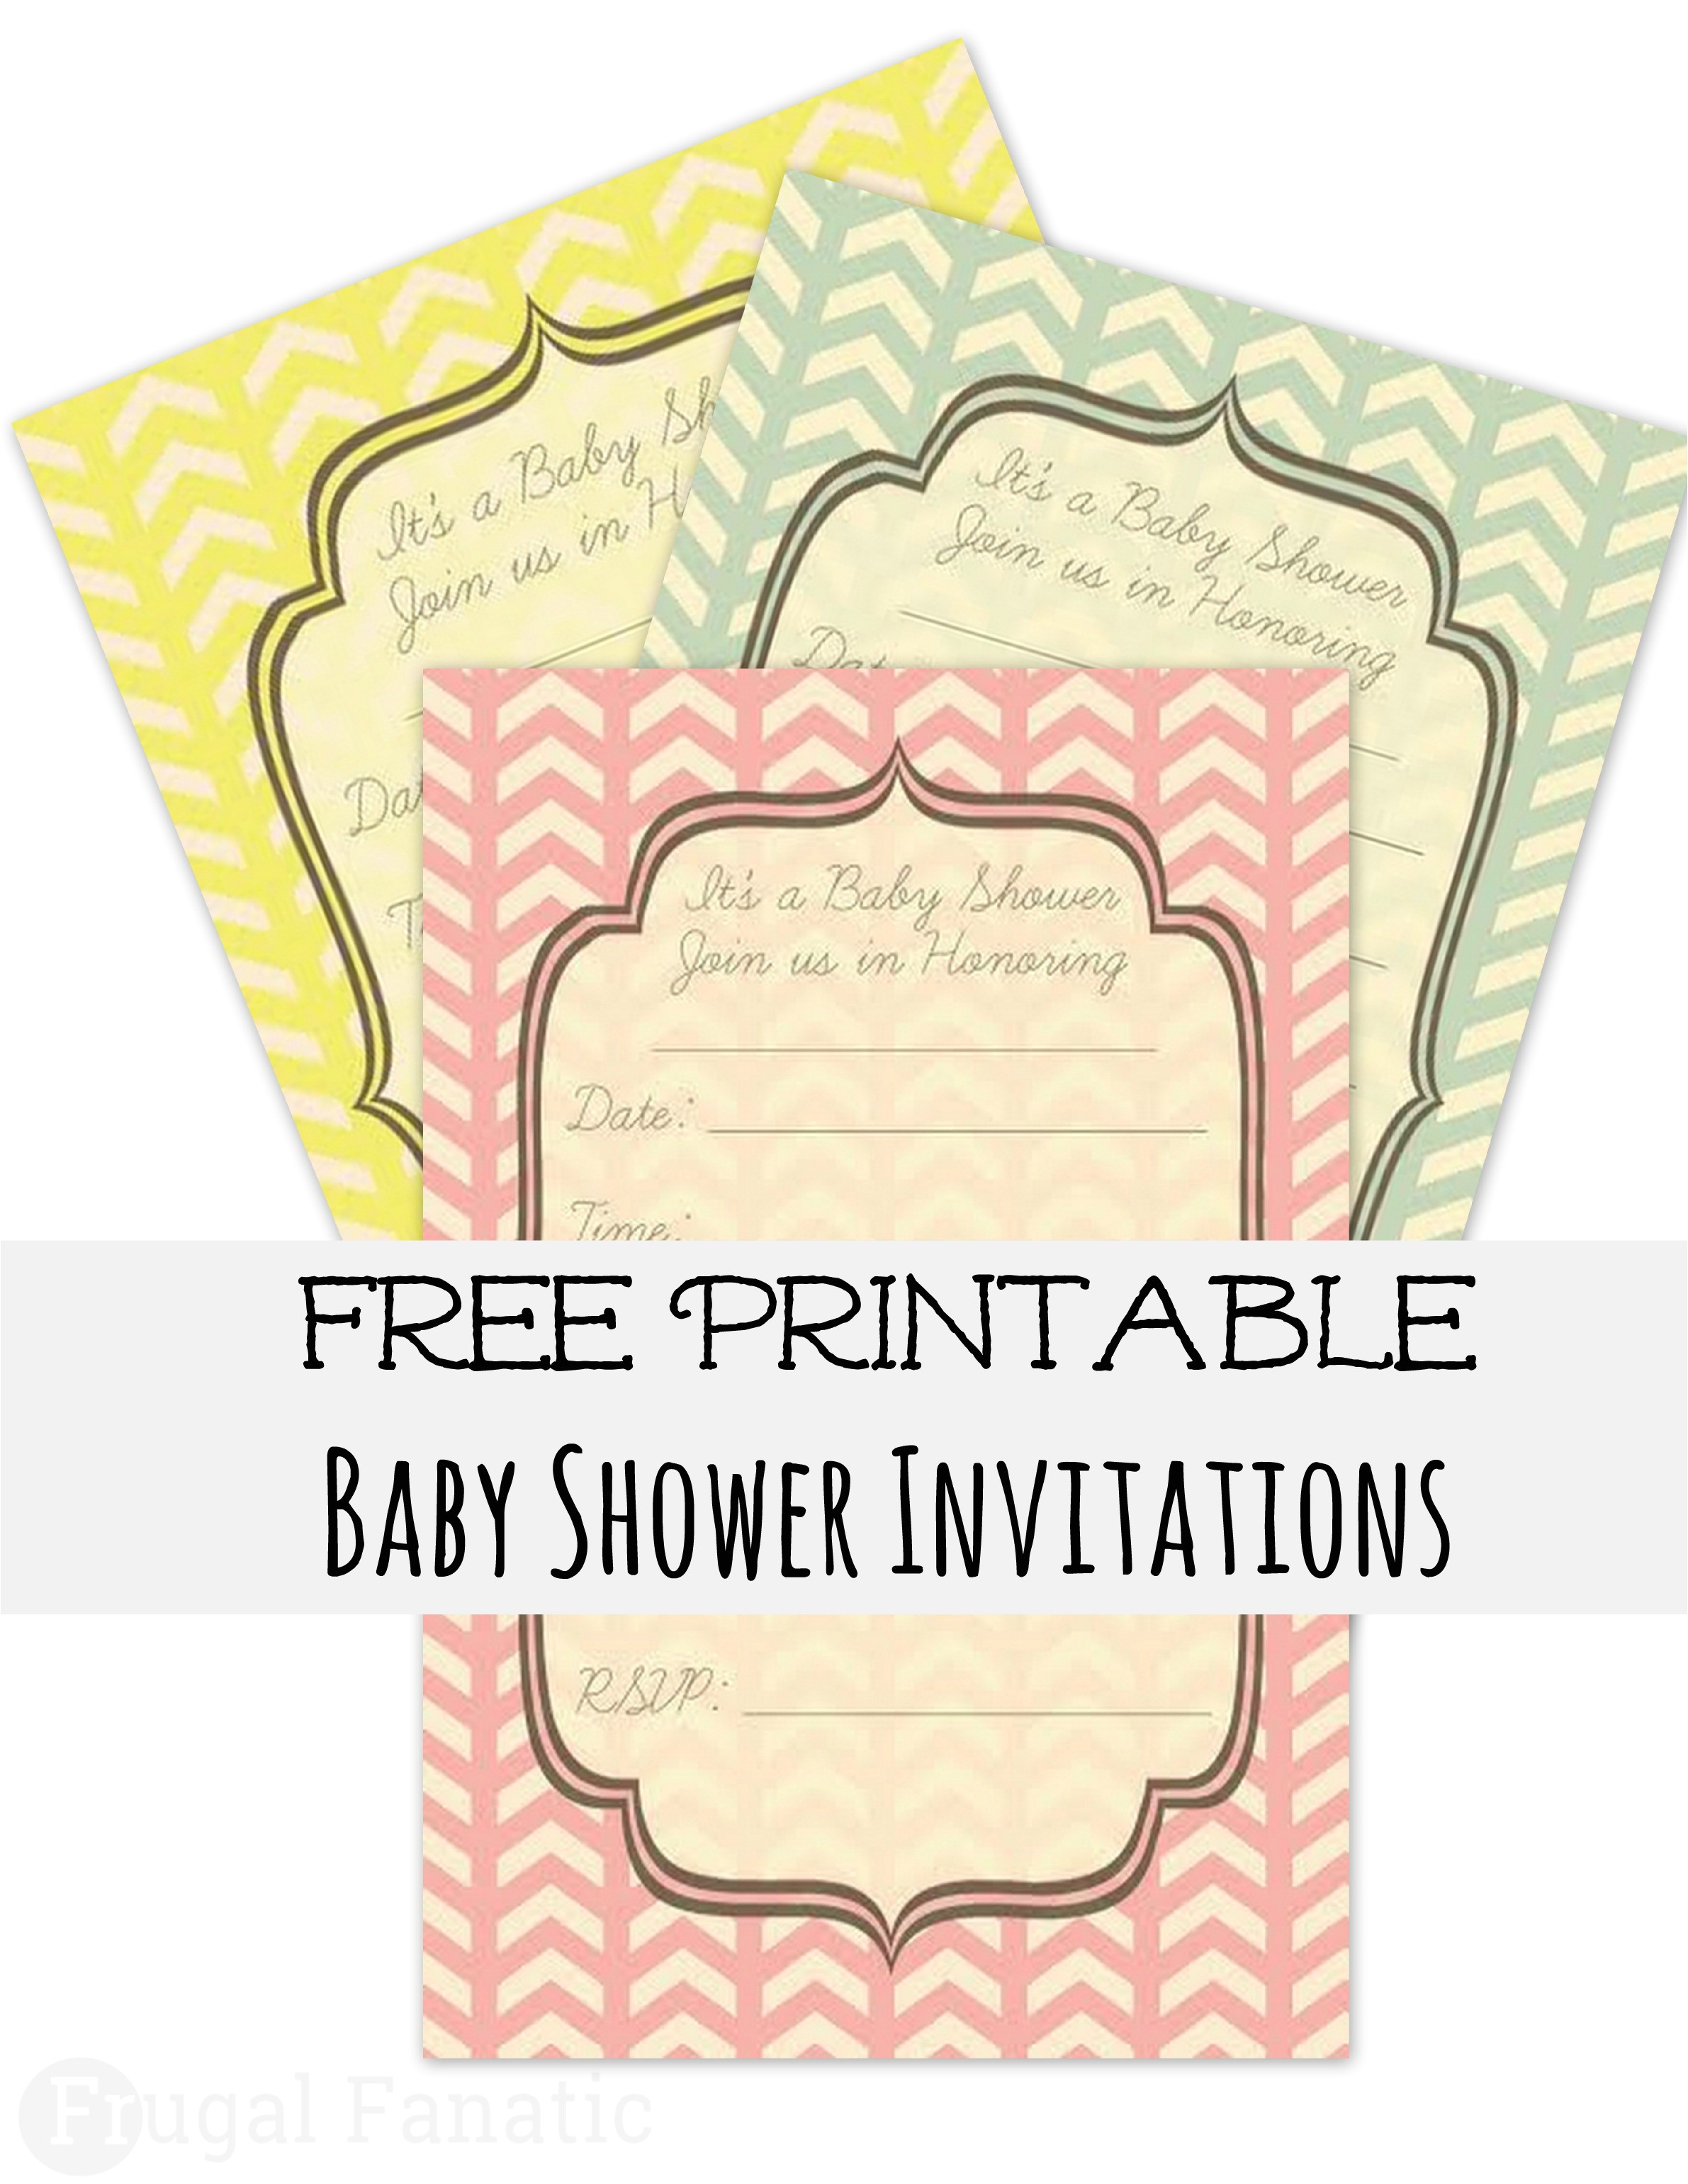 Create A Baby Shower Invitation Online Free Baby Shower Invitations Create Your Own Free